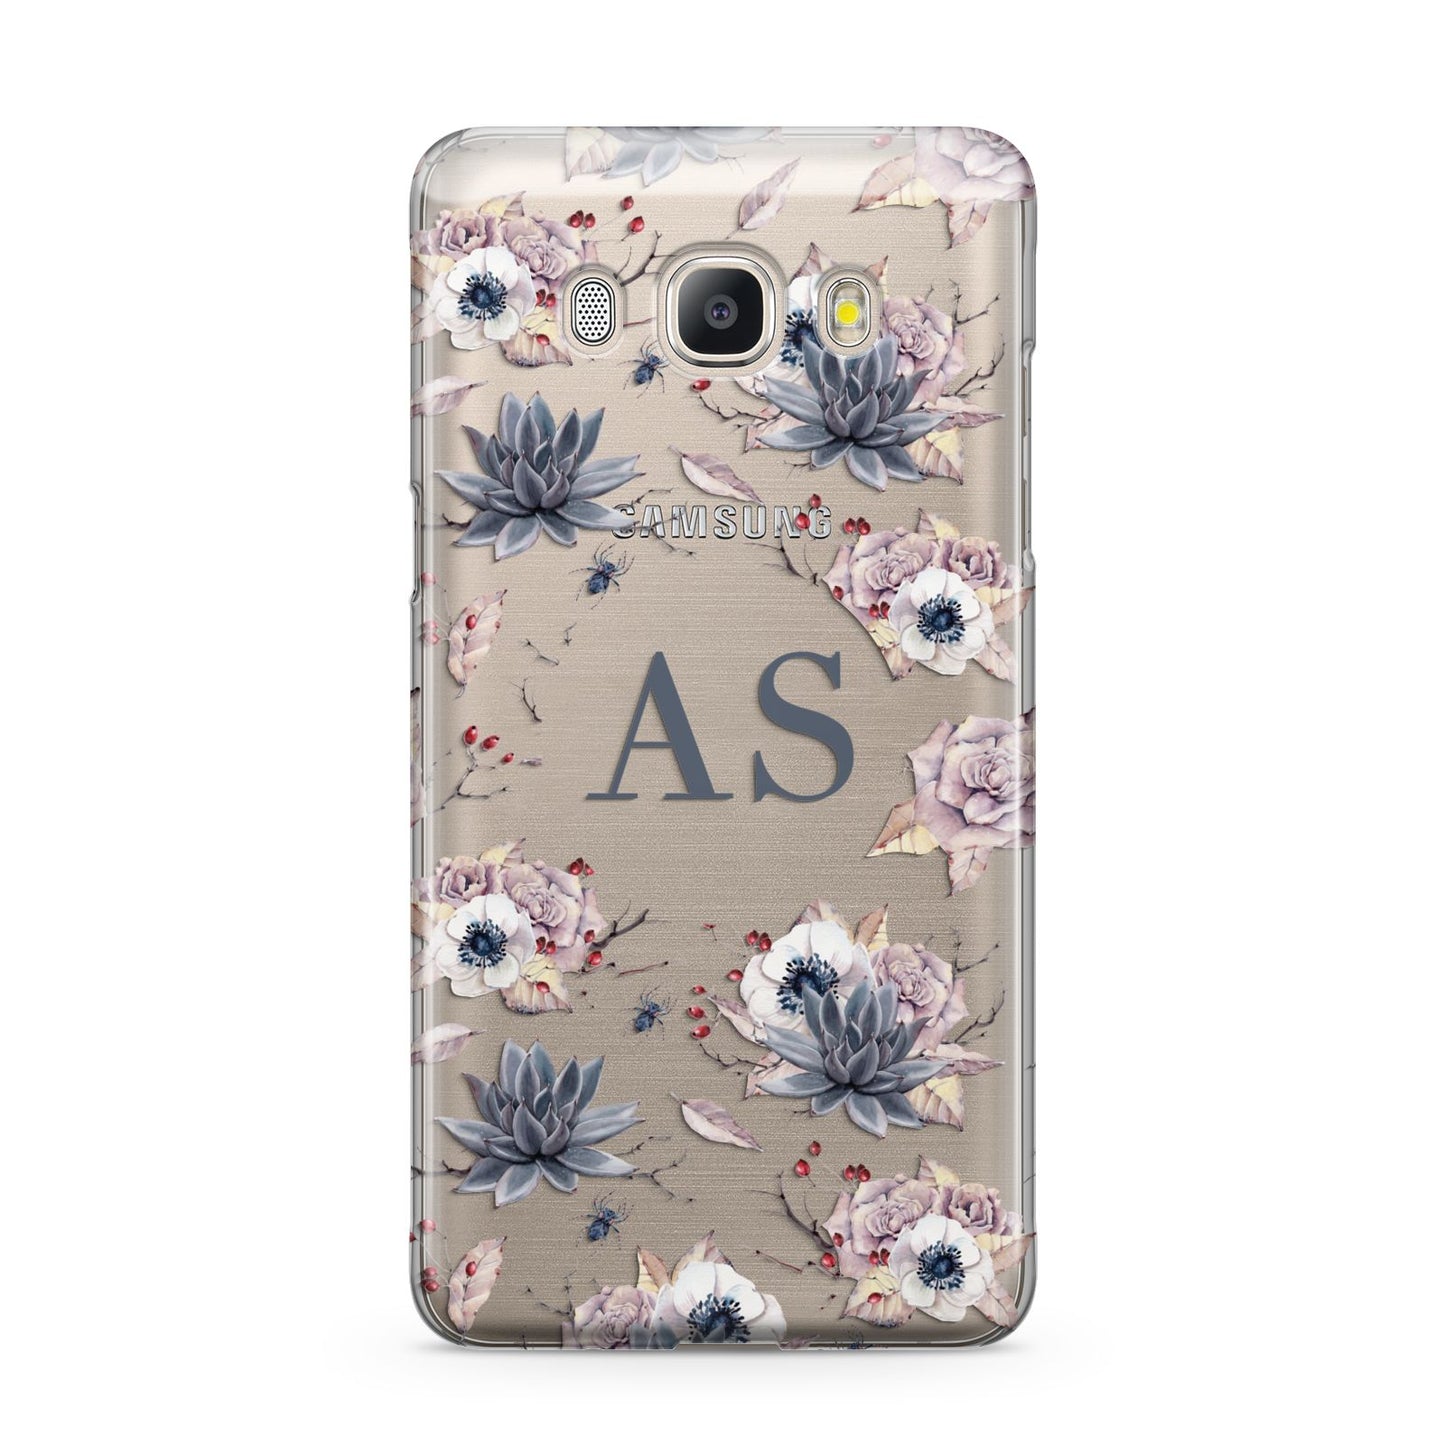 Personalised Halloween Floral Samsung Galaxy J5 2016 Case